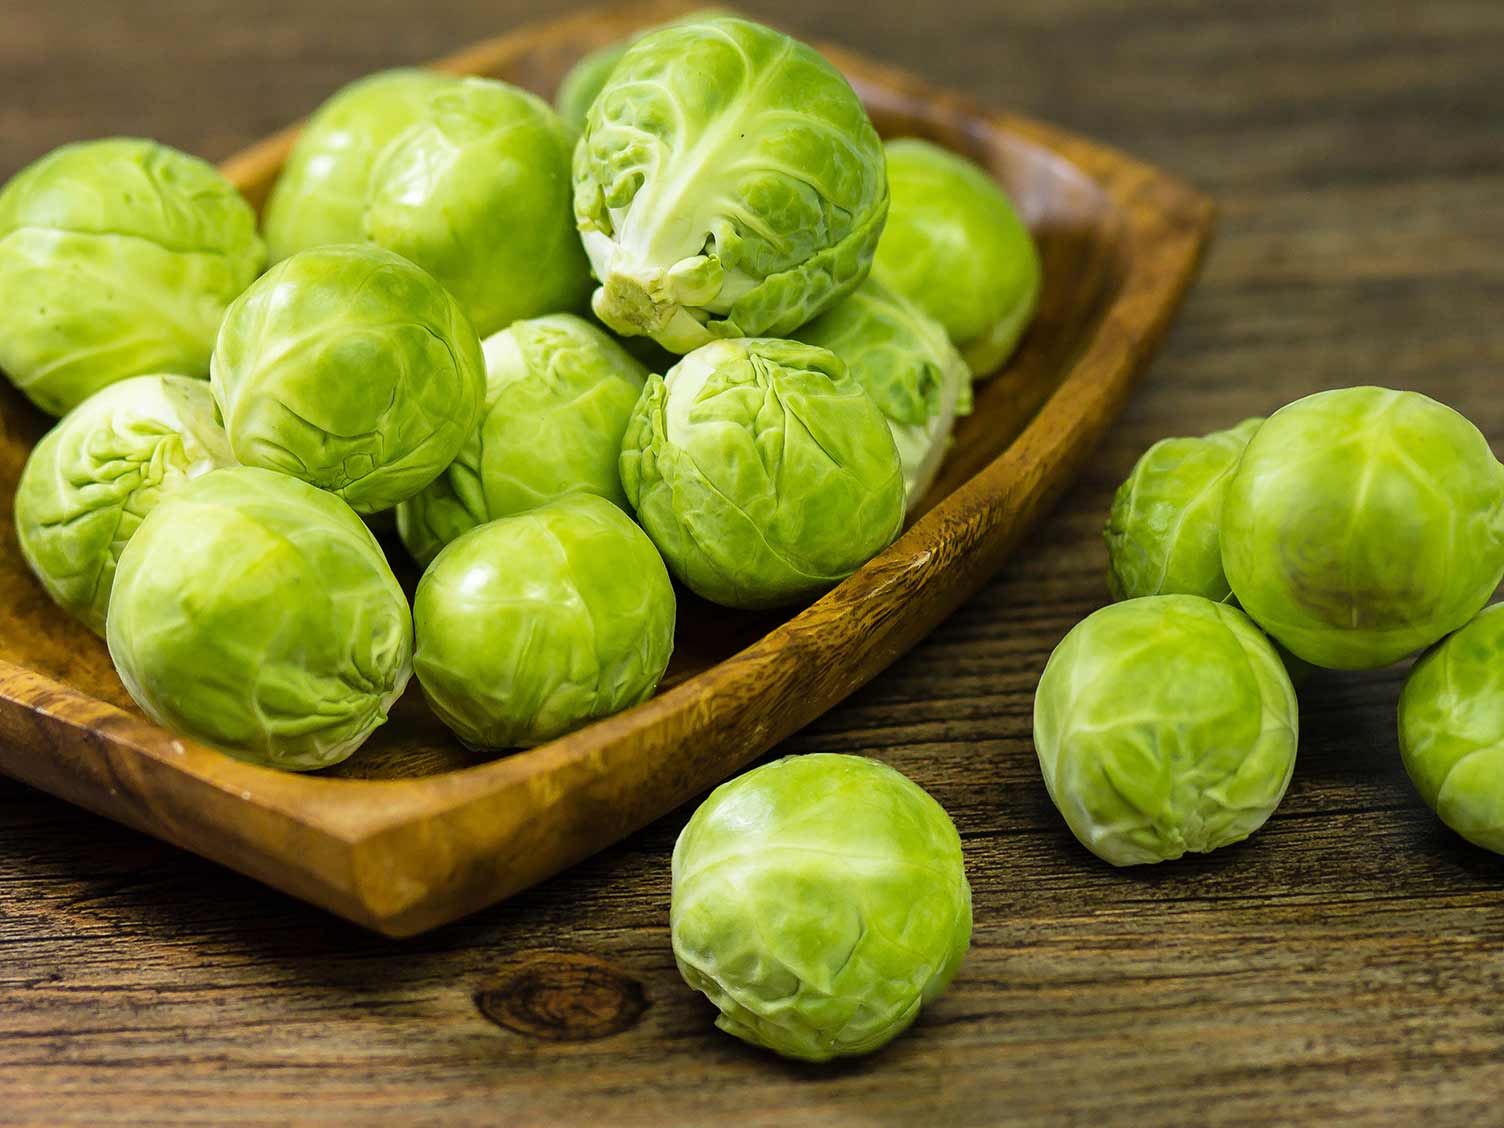 Can dogs eat brussel sprouts